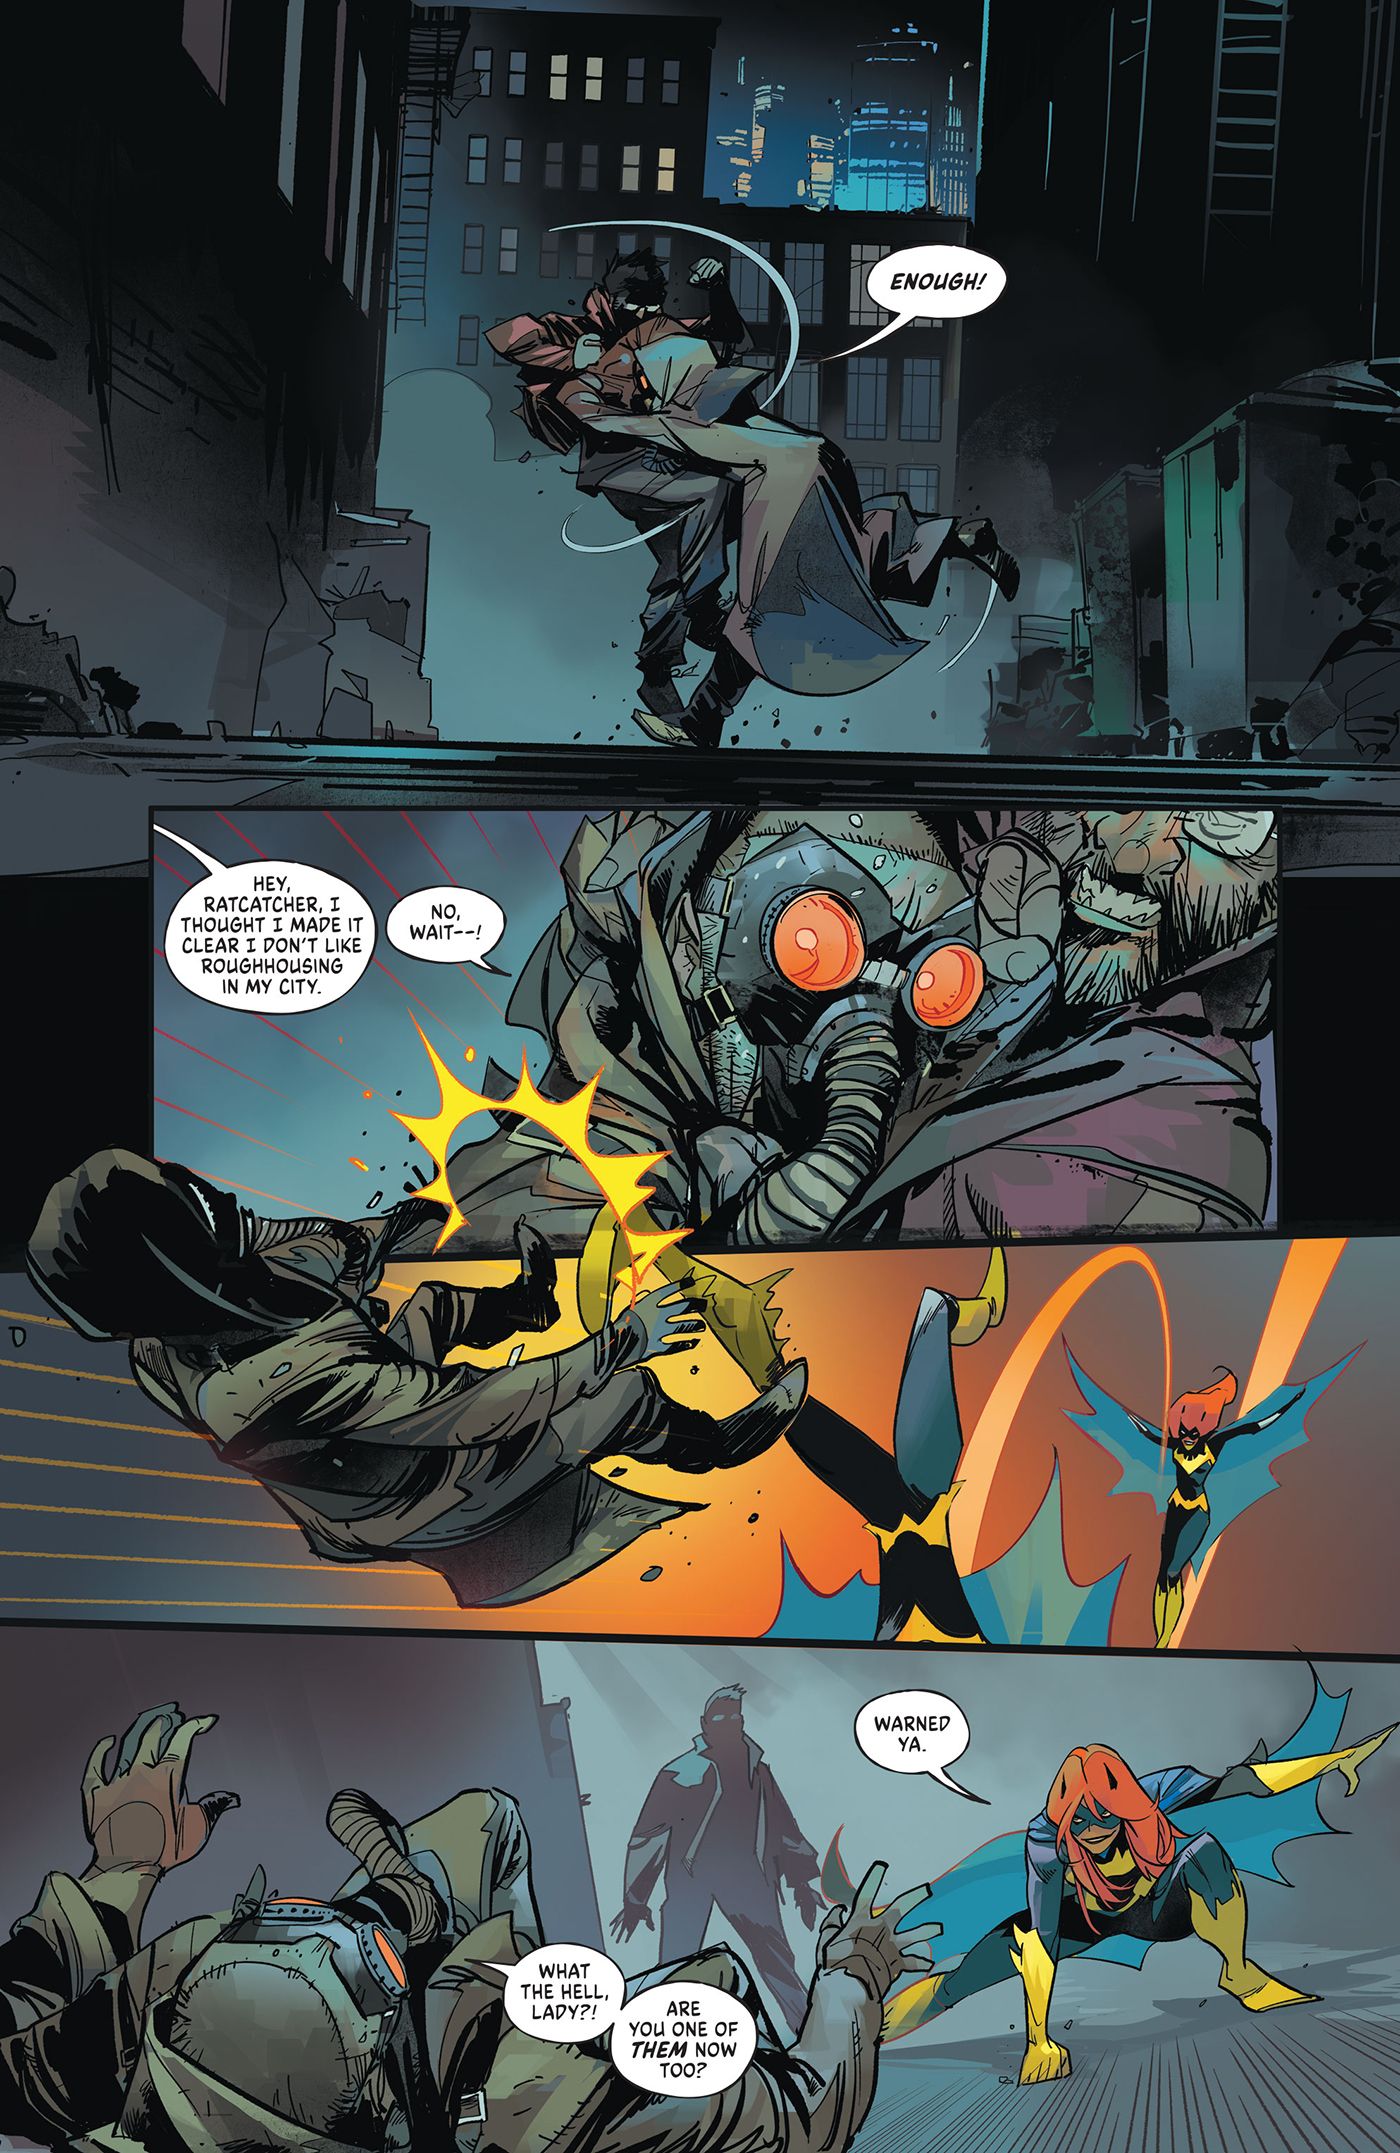 Ratcatcher fights off someone in an alley before being stopped by Batgirl.